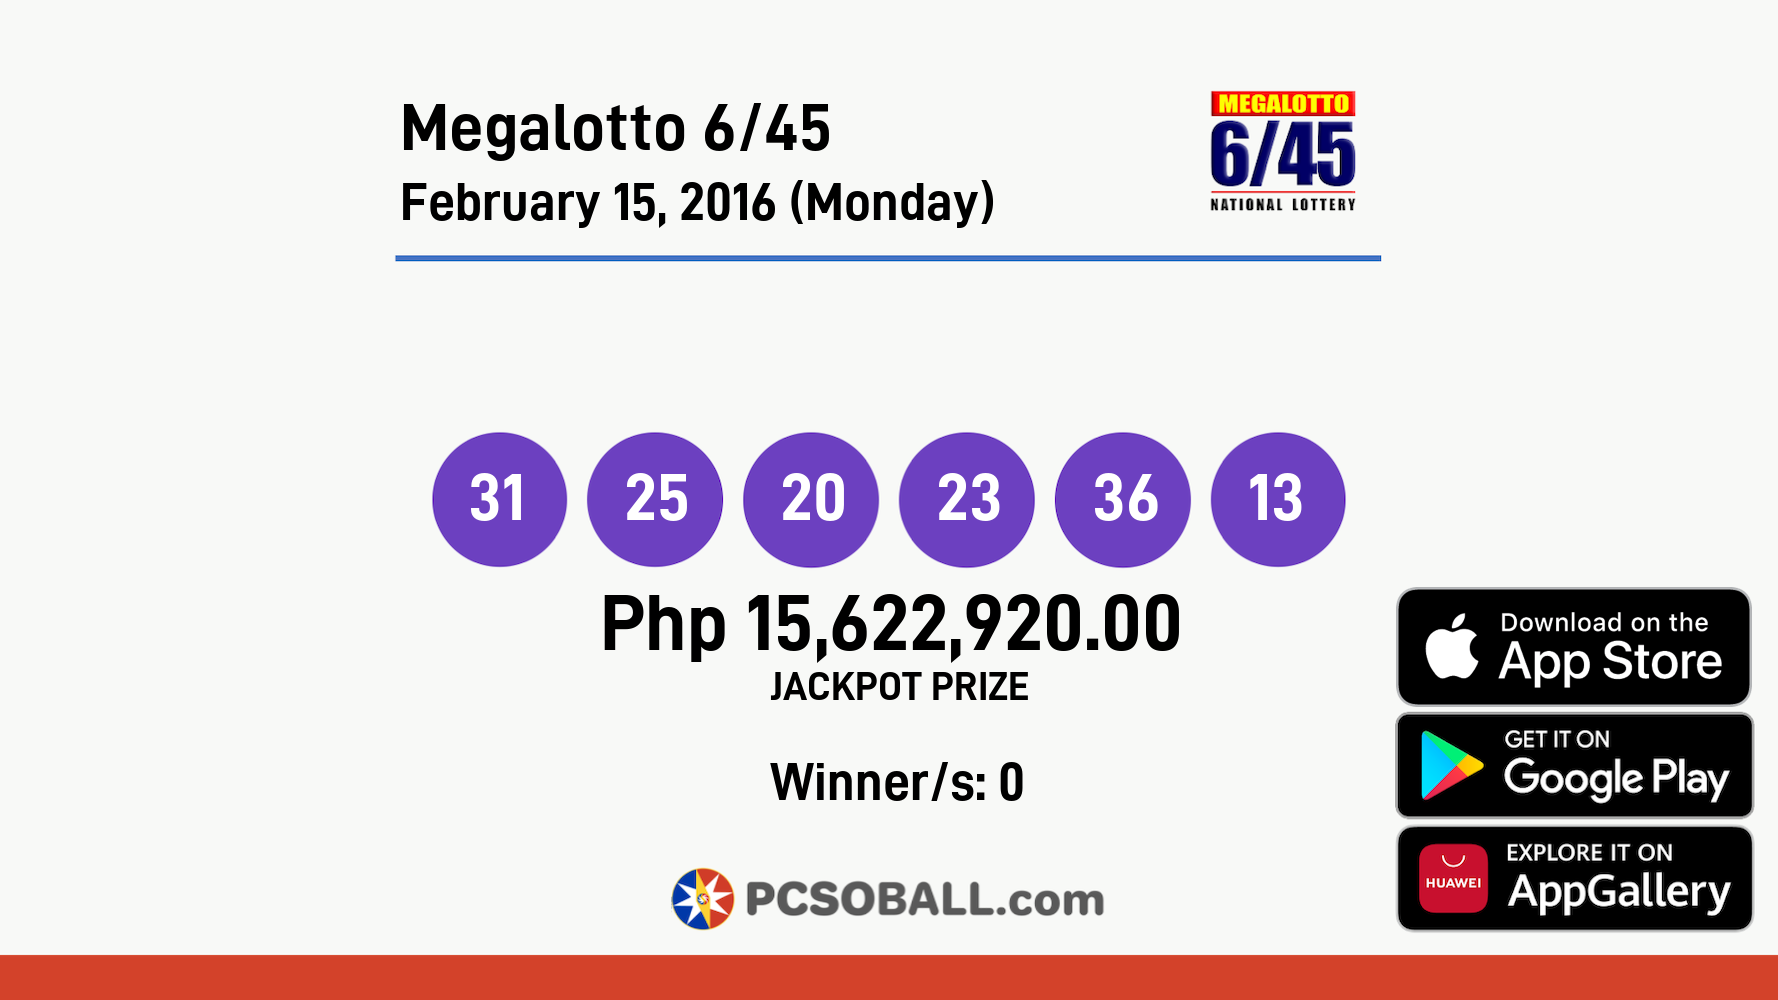 Megalotto 6/45 February 15, 2016 (Monday) Result